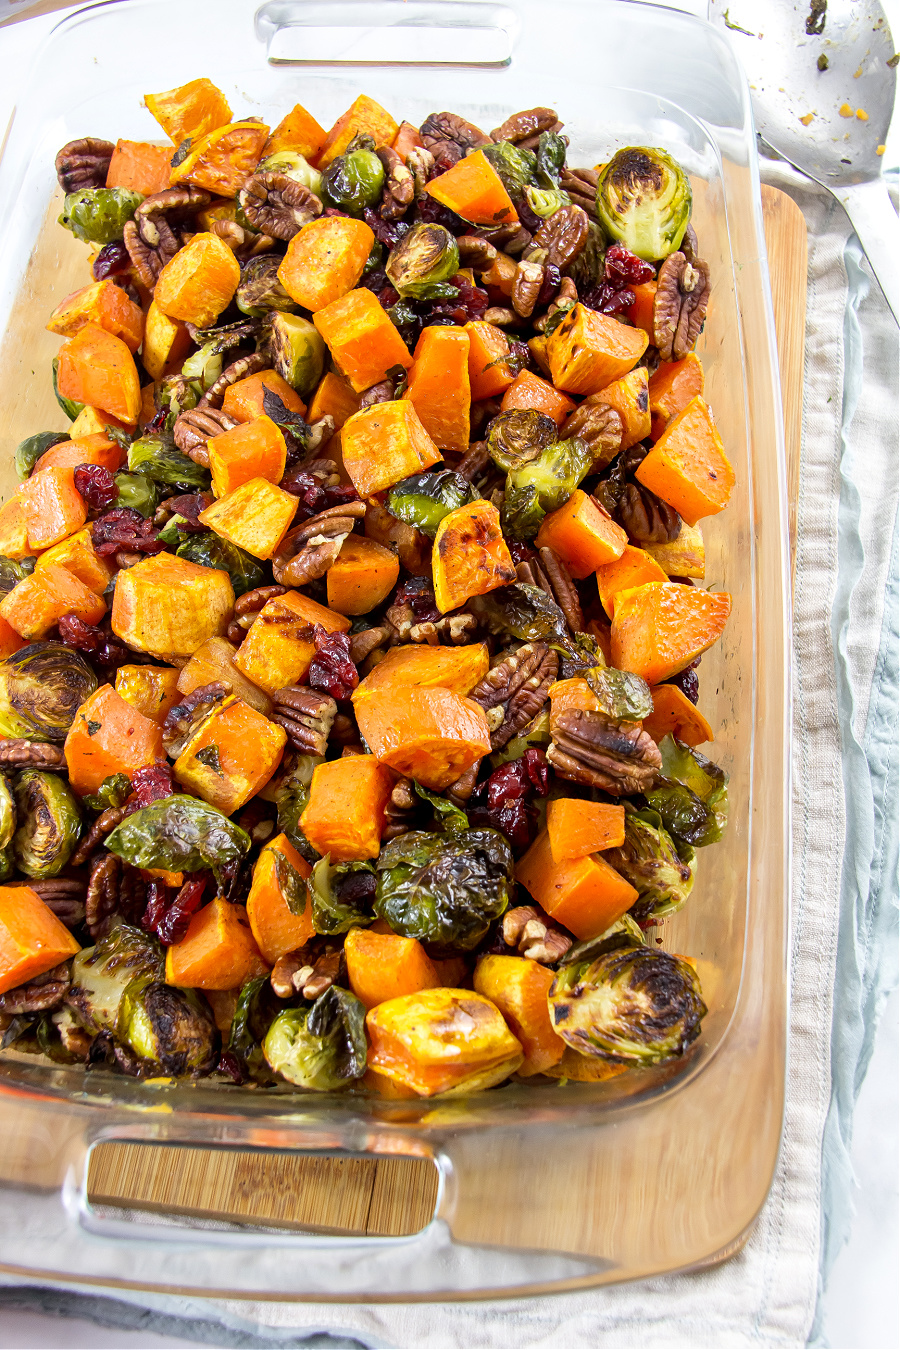 Thanksgiving side dish of roasted sweet potatoes and brussels sprouts with cranberries and pecans